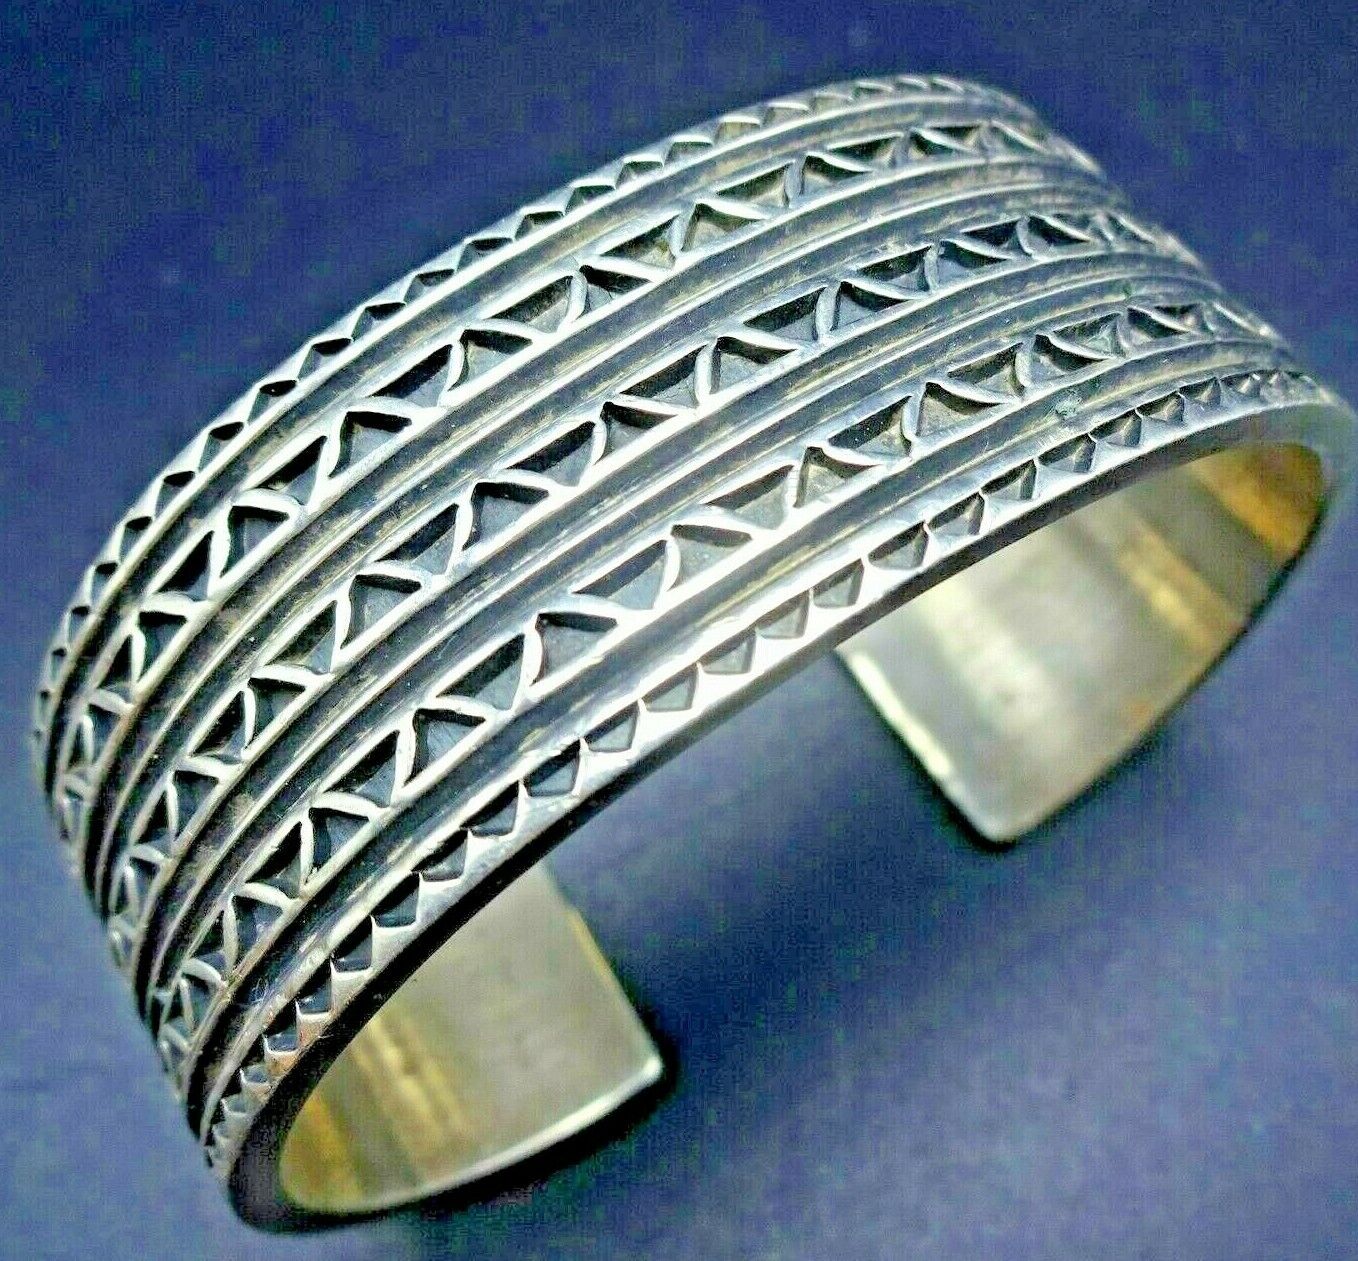 ORVILLE WHITE Vintage NAVAJO Heavy Hand-Stamped Sterling Silver Cuff BRACELET